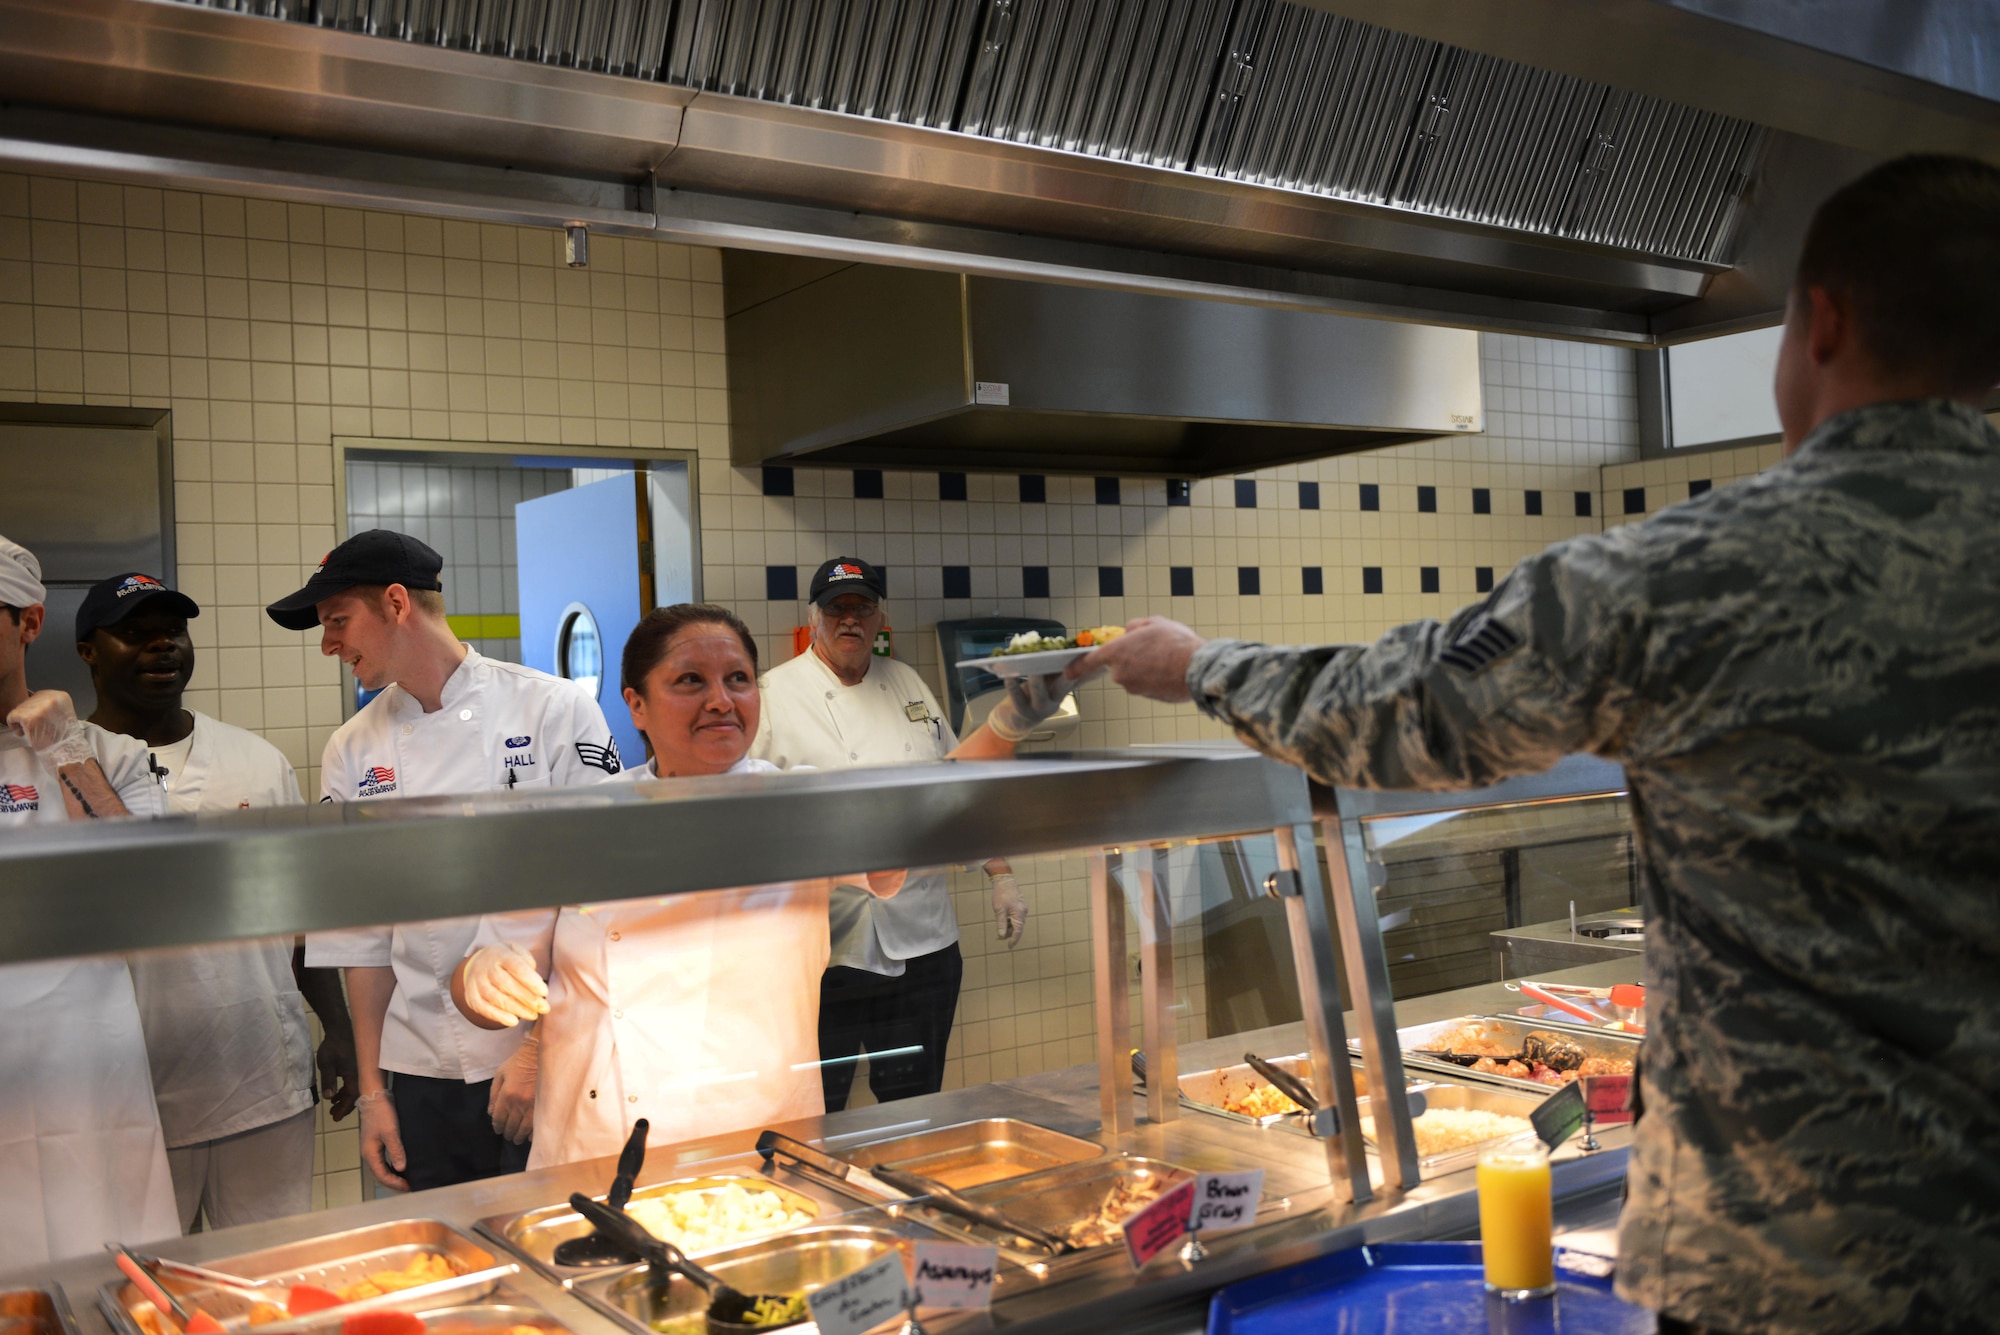 Mabel Raab, 786th Force Support Squadron cook helper, serves an Airman at the Linberg Hof Dining Facility Aug. 30, 2016, at Kapaun Air Station, Germany. The 786th FSS falls under the 86th Mission Support Group, which hosted an immersion tour for Brig. Gen. Richard G. Moore Jr., 86th Airlift Wing commander. (U.S. Air Force photo/Airman 1st Class Joshua Magbanua)